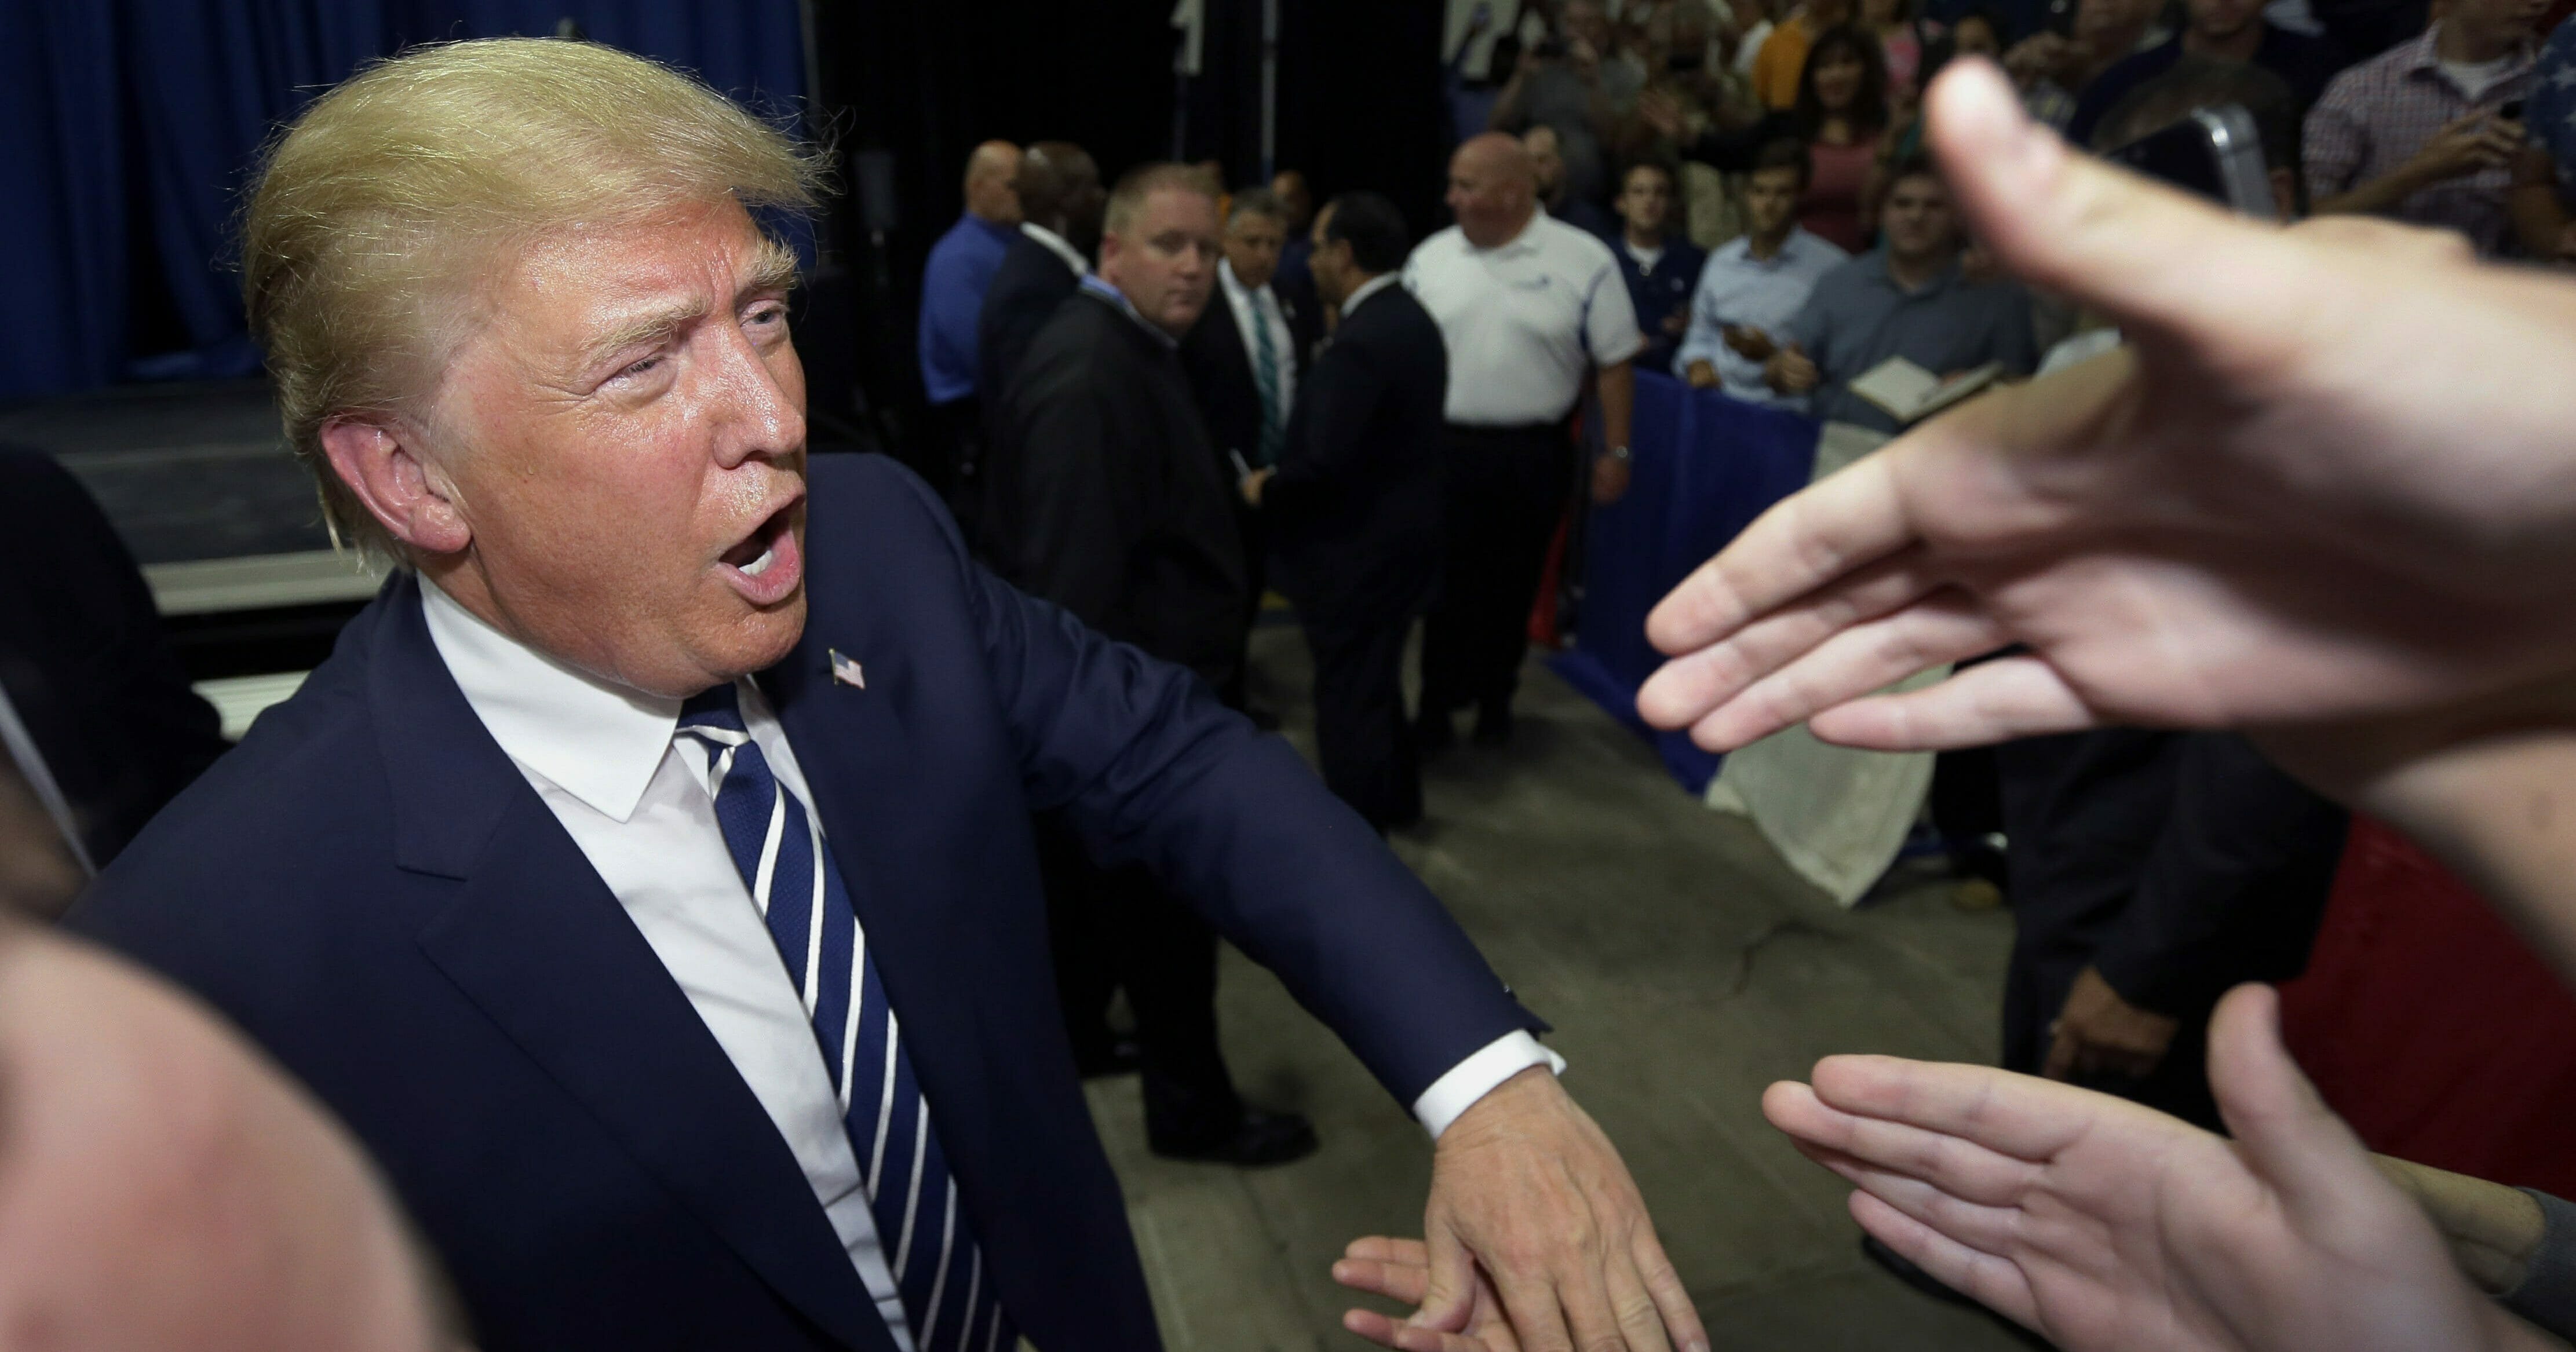 Donald Trump meets supporters after a GOP fundraising event in Birch Run, Mich., on Aug. 11, 2015.